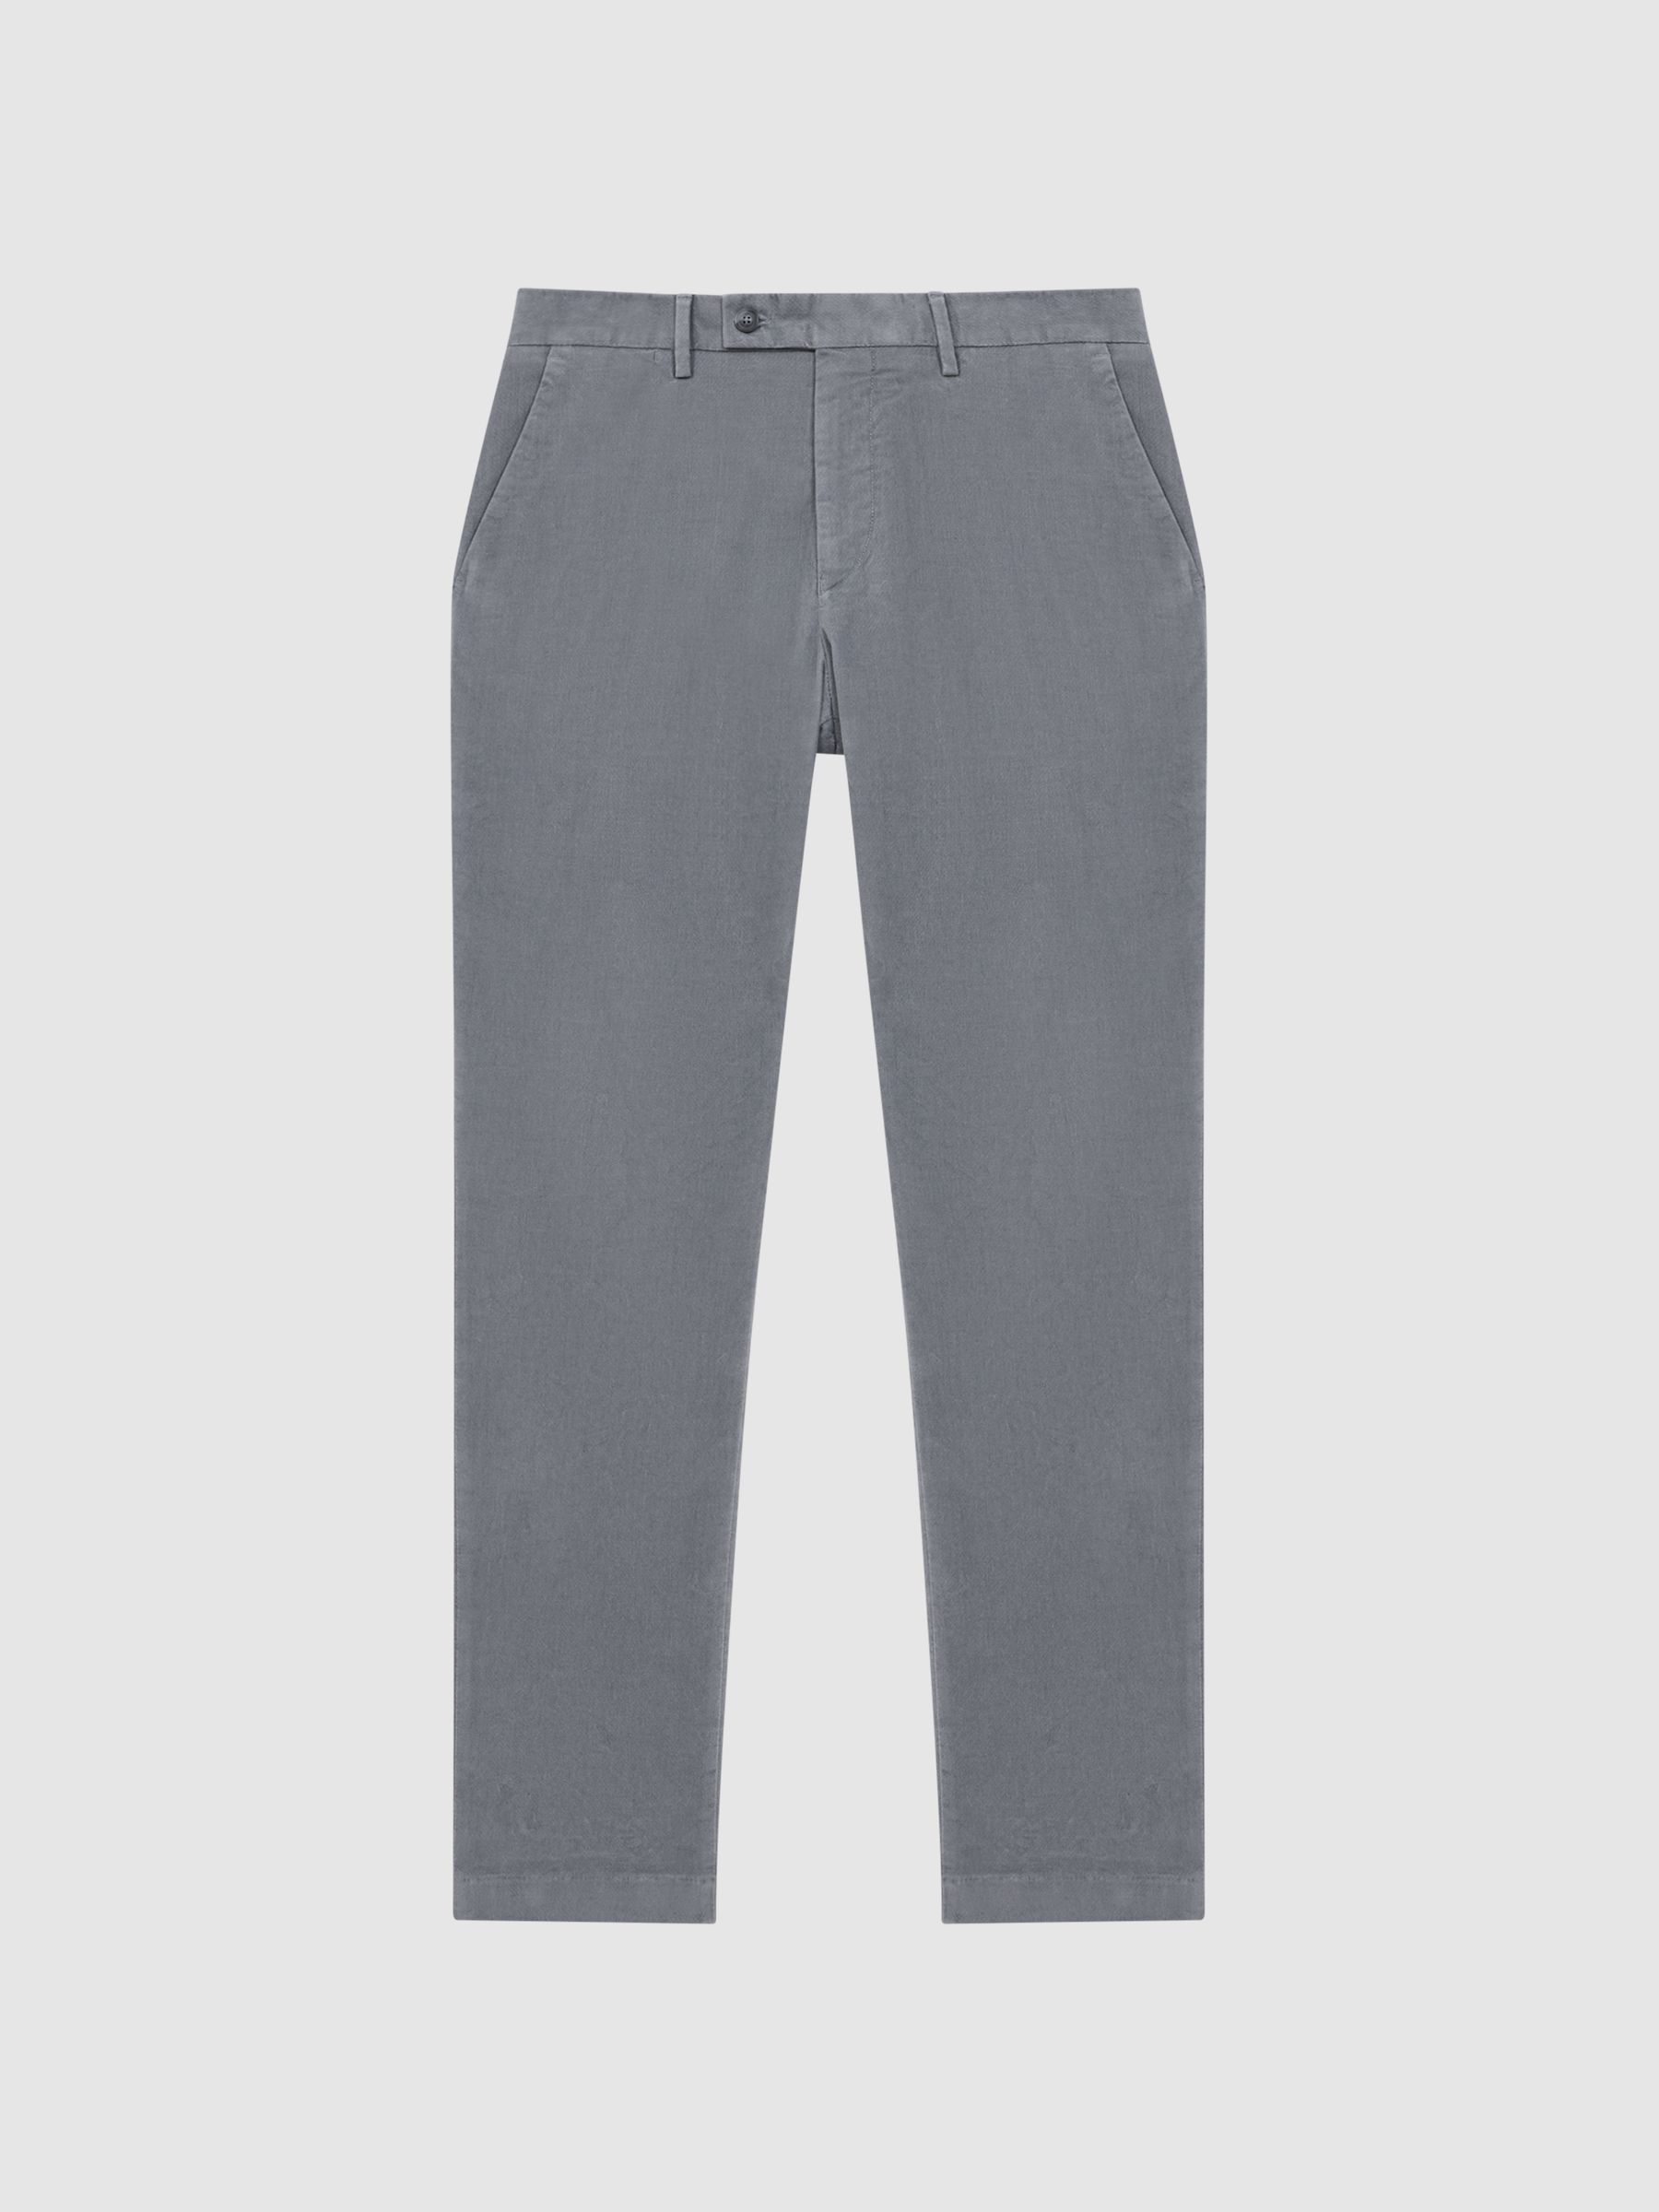 Reiss Strike Slim Fit Brushed Cotton Trousers - REISS